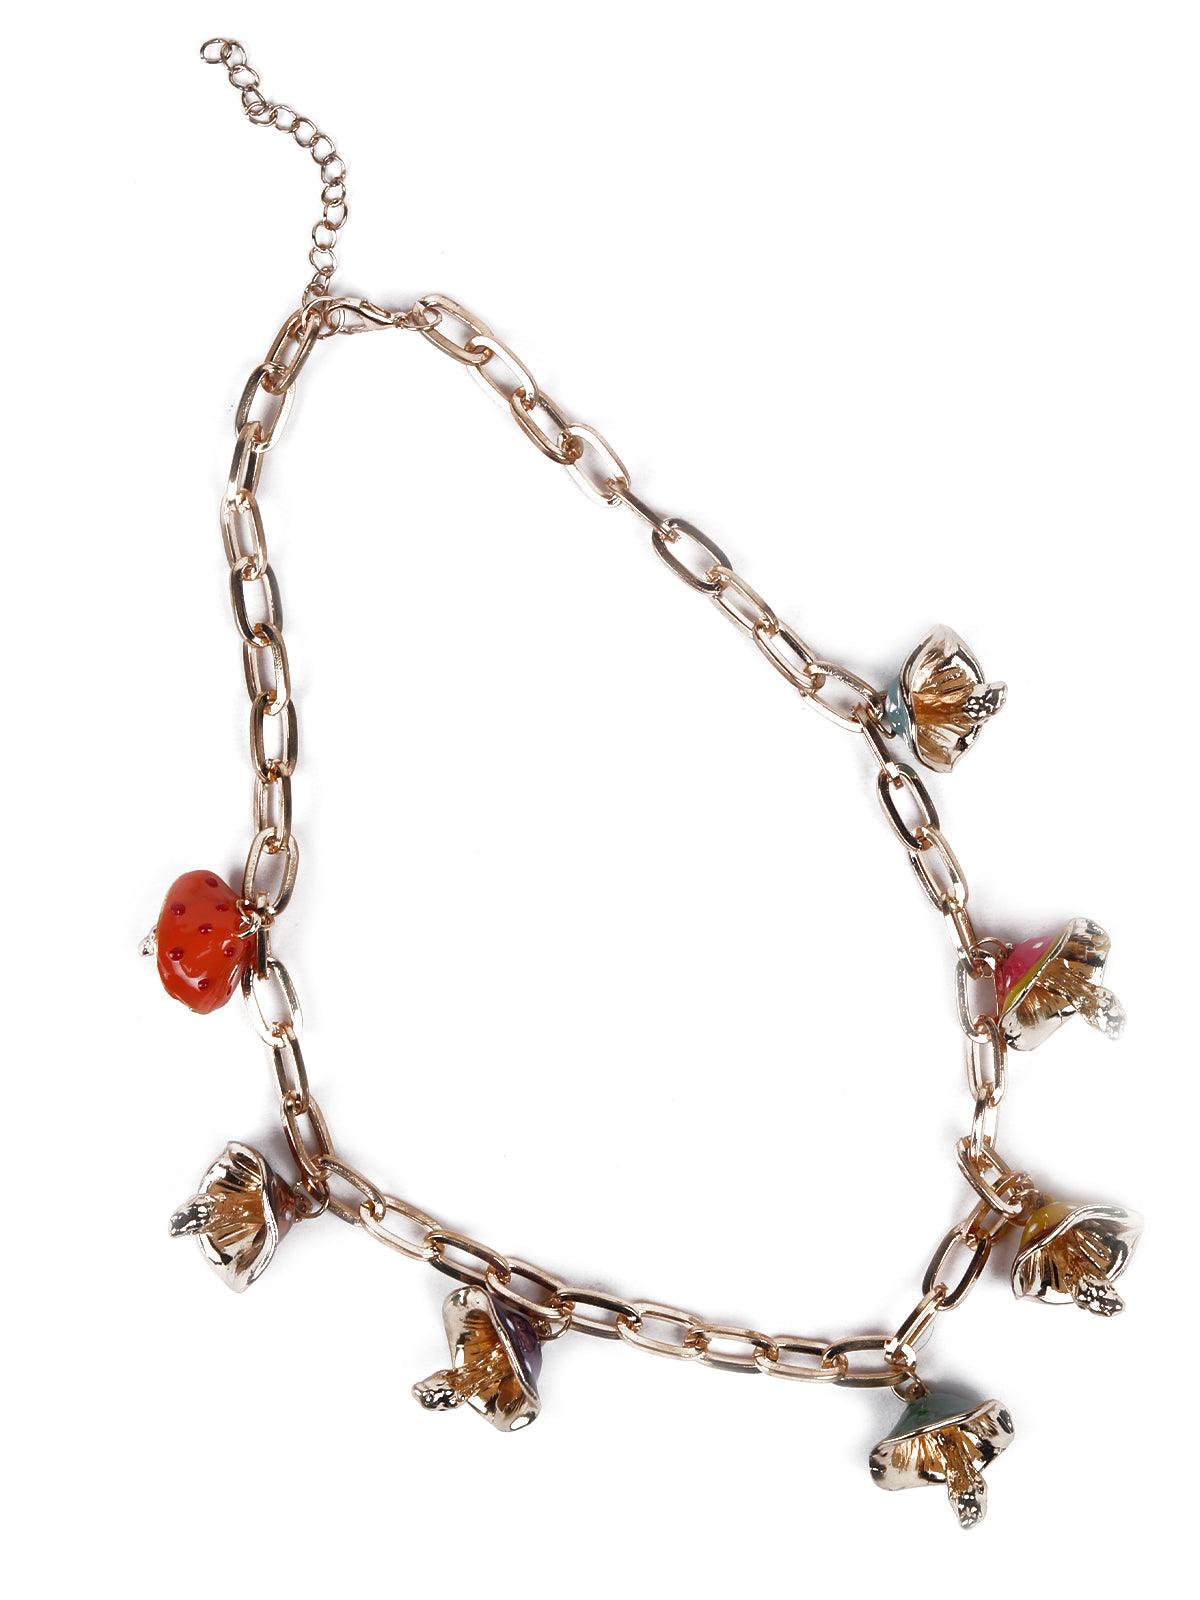 Gold-tone chained necklace embellished with charms - Odette